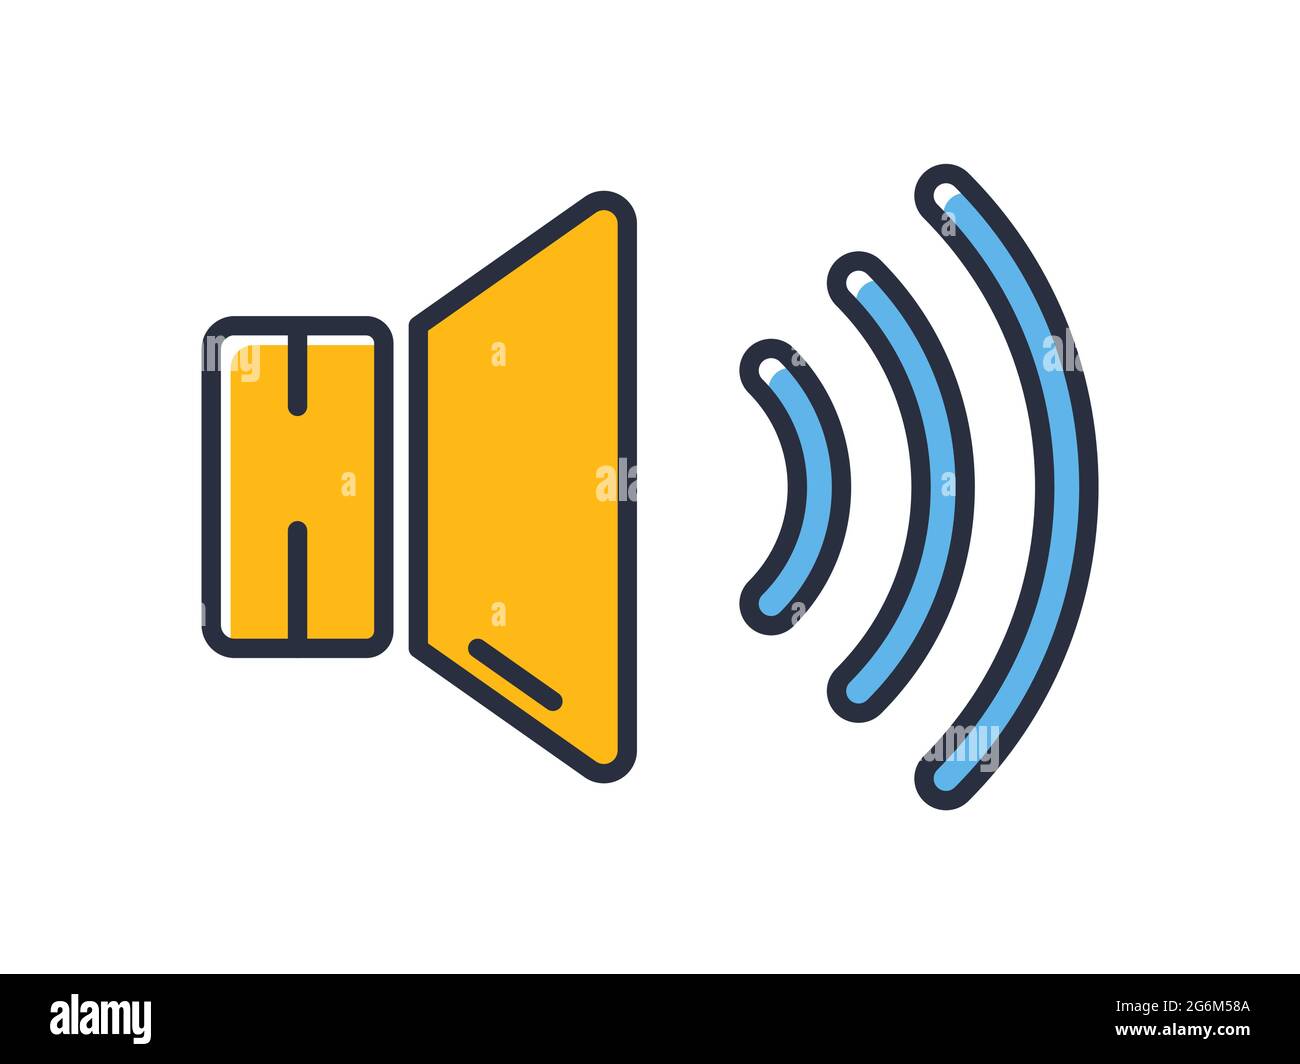 Speaker sound icon. Audio speaker volume isolated on white background. Design elements colored. Can be used for mobile concepts and web applications, Stock Vector